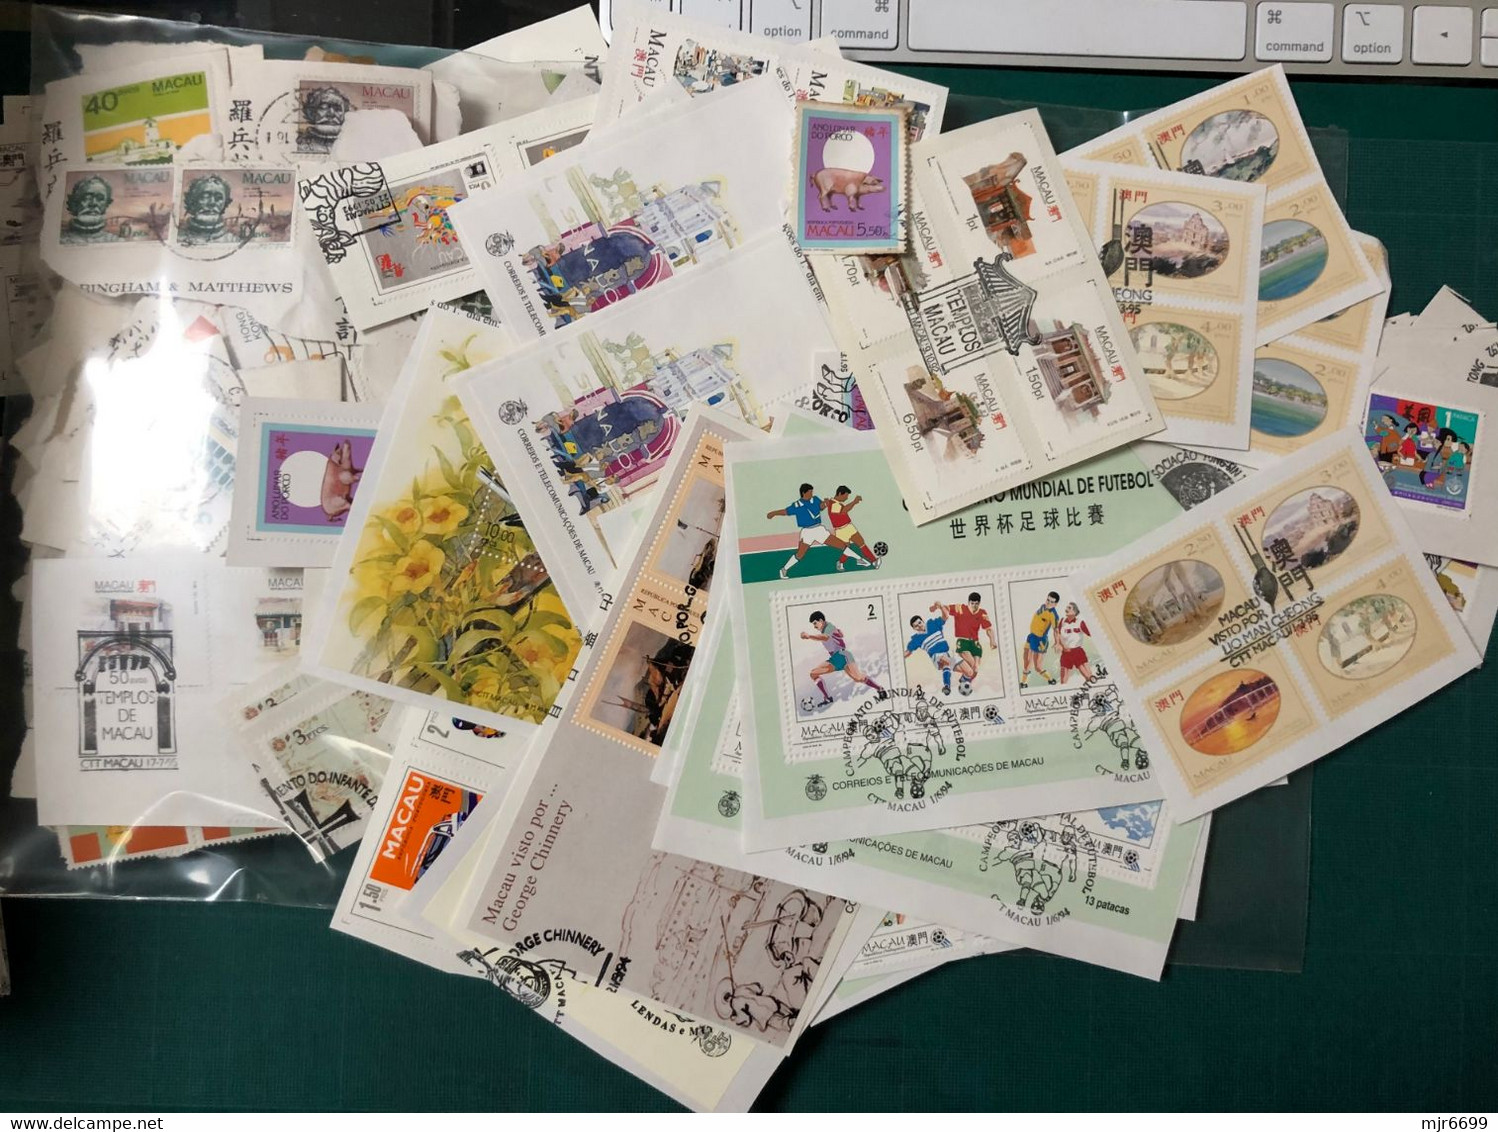 MACAU LOT OF MORE THAN 100 SETS OR SINGLES ON PAPER, AROUND 250 GRAMS, DUPLICATIONS, PLEASE SEE THE PHOTOS, #C